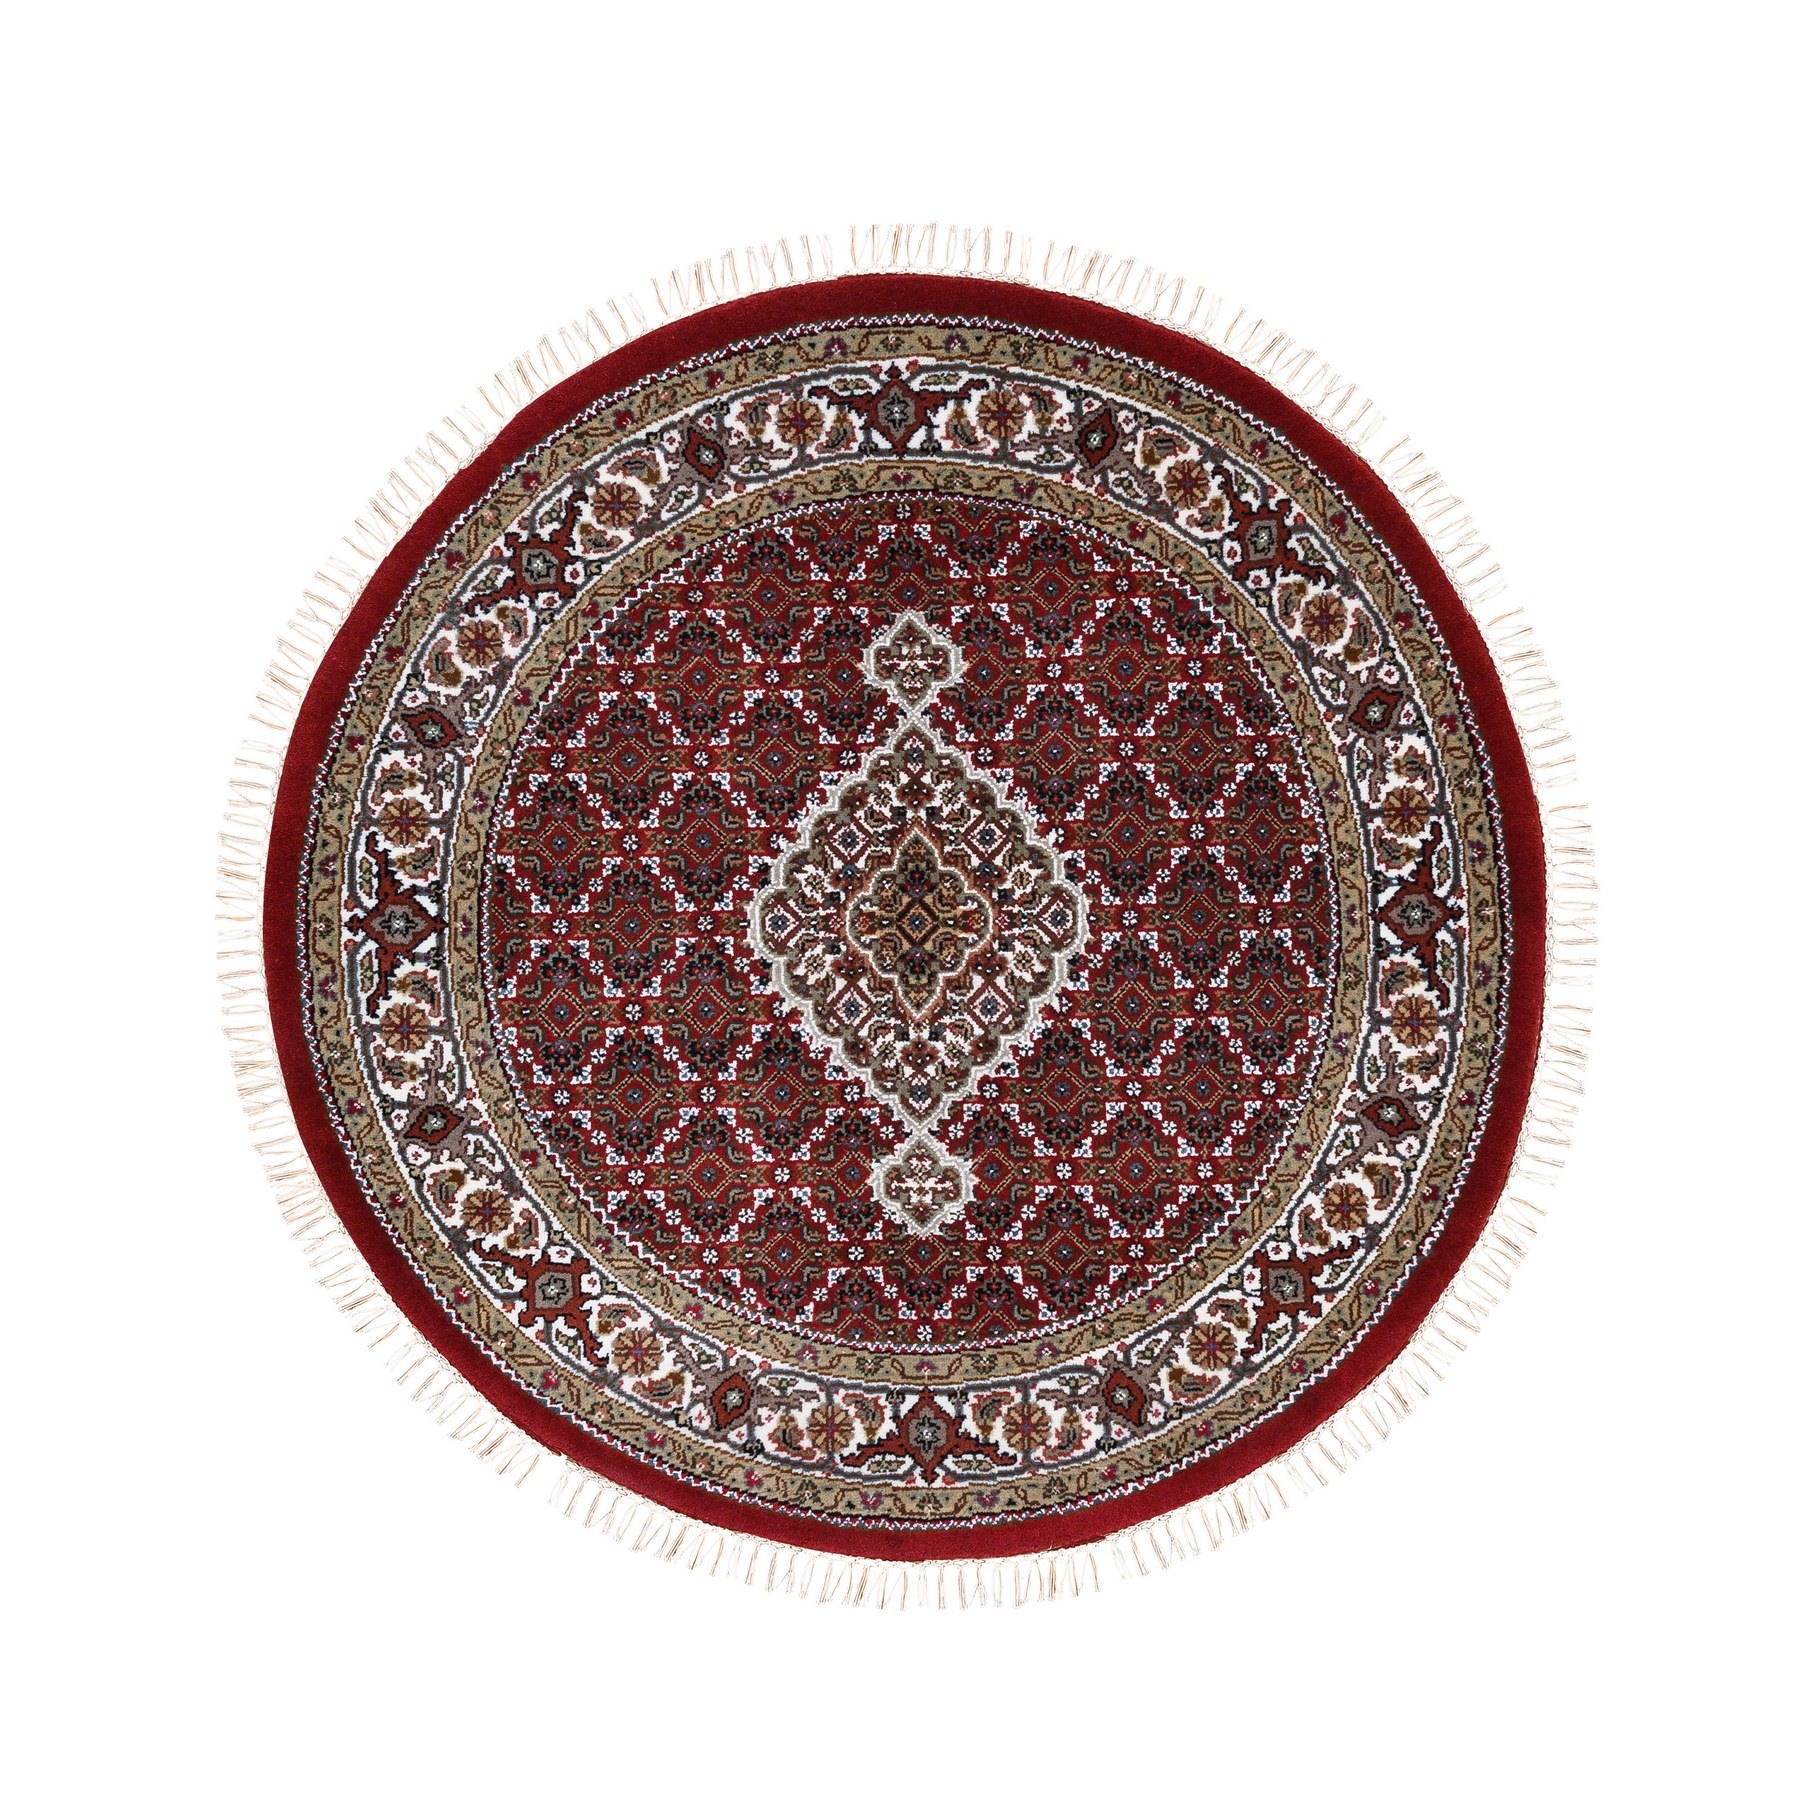 Pirniakan Collection Hand Knotted Red Rug No: 1124882